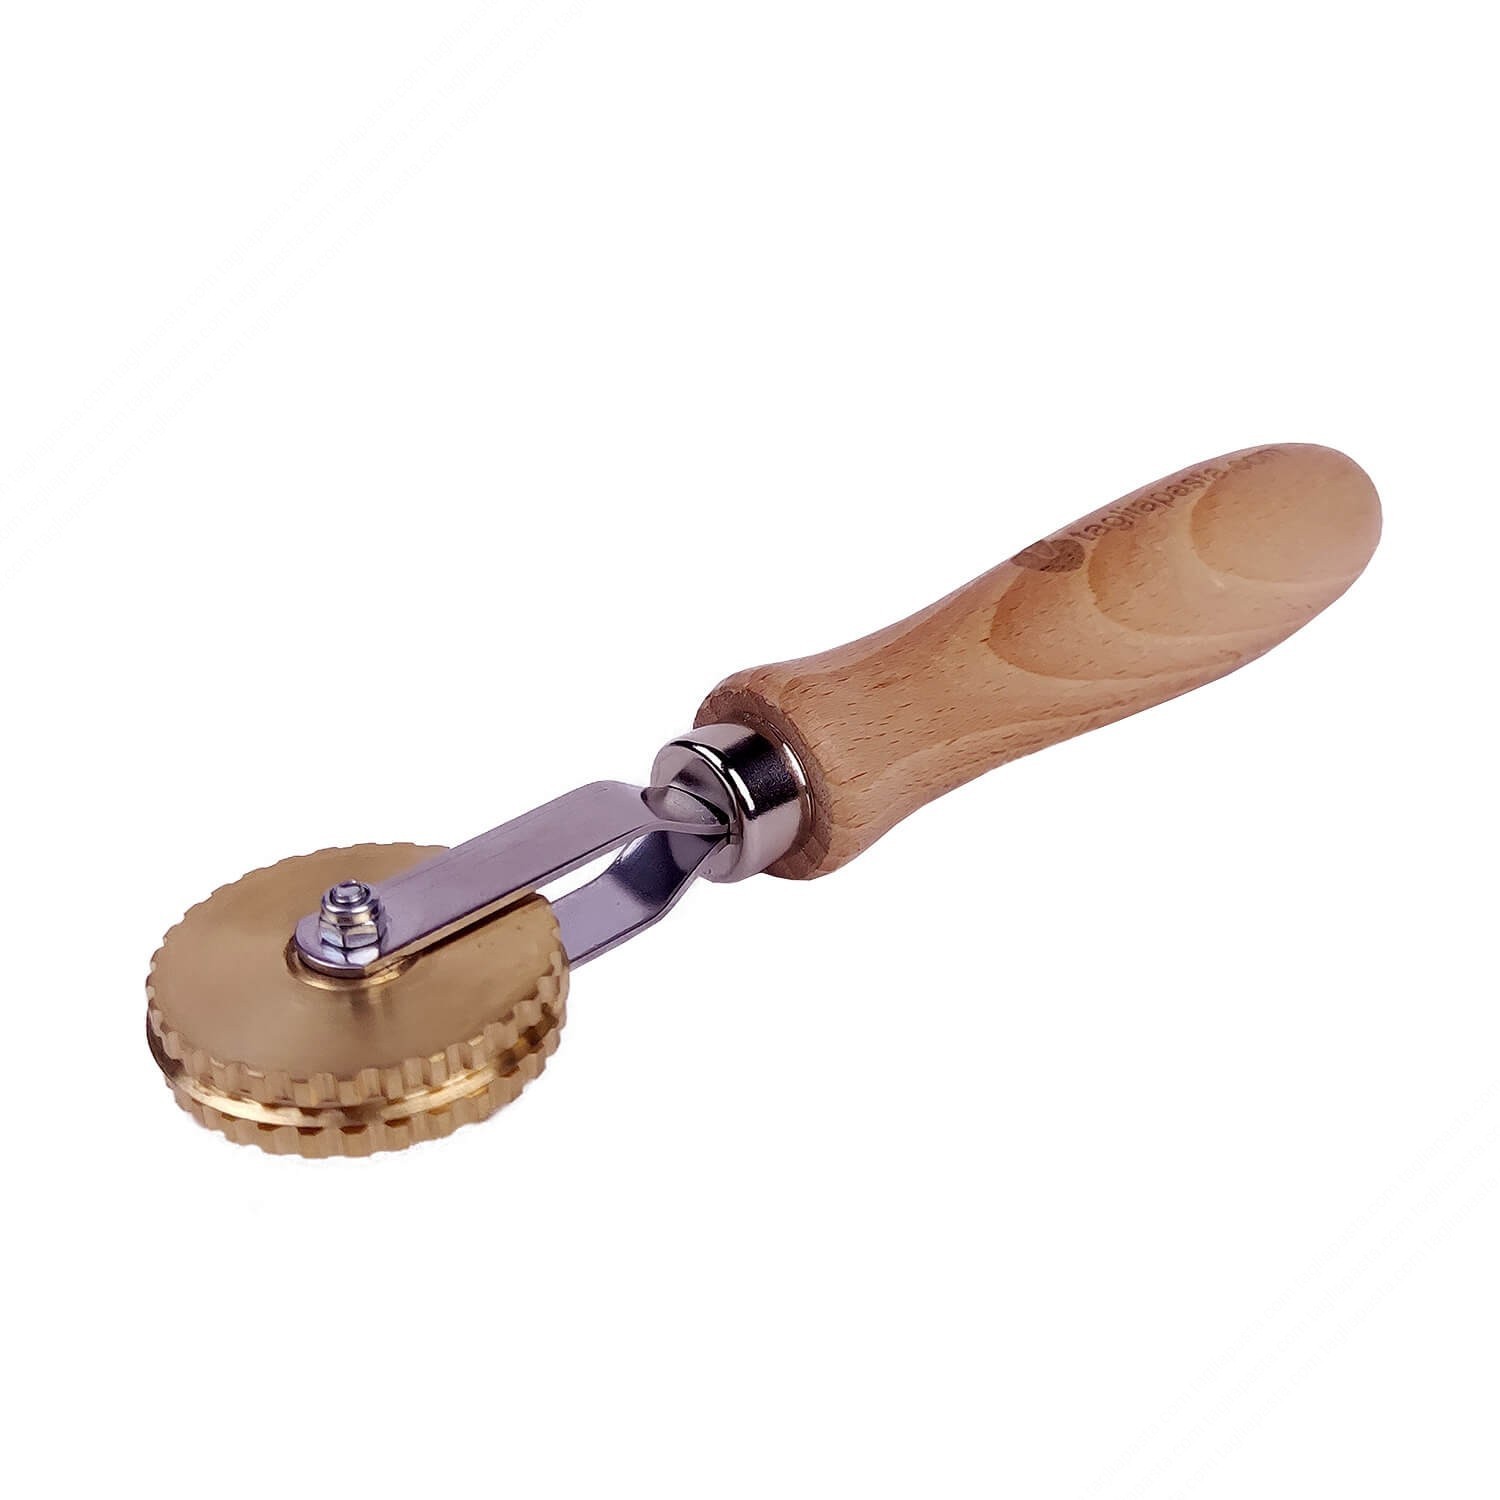 Brass rolling cutter for cutting and sealing Pasta with smooth blade